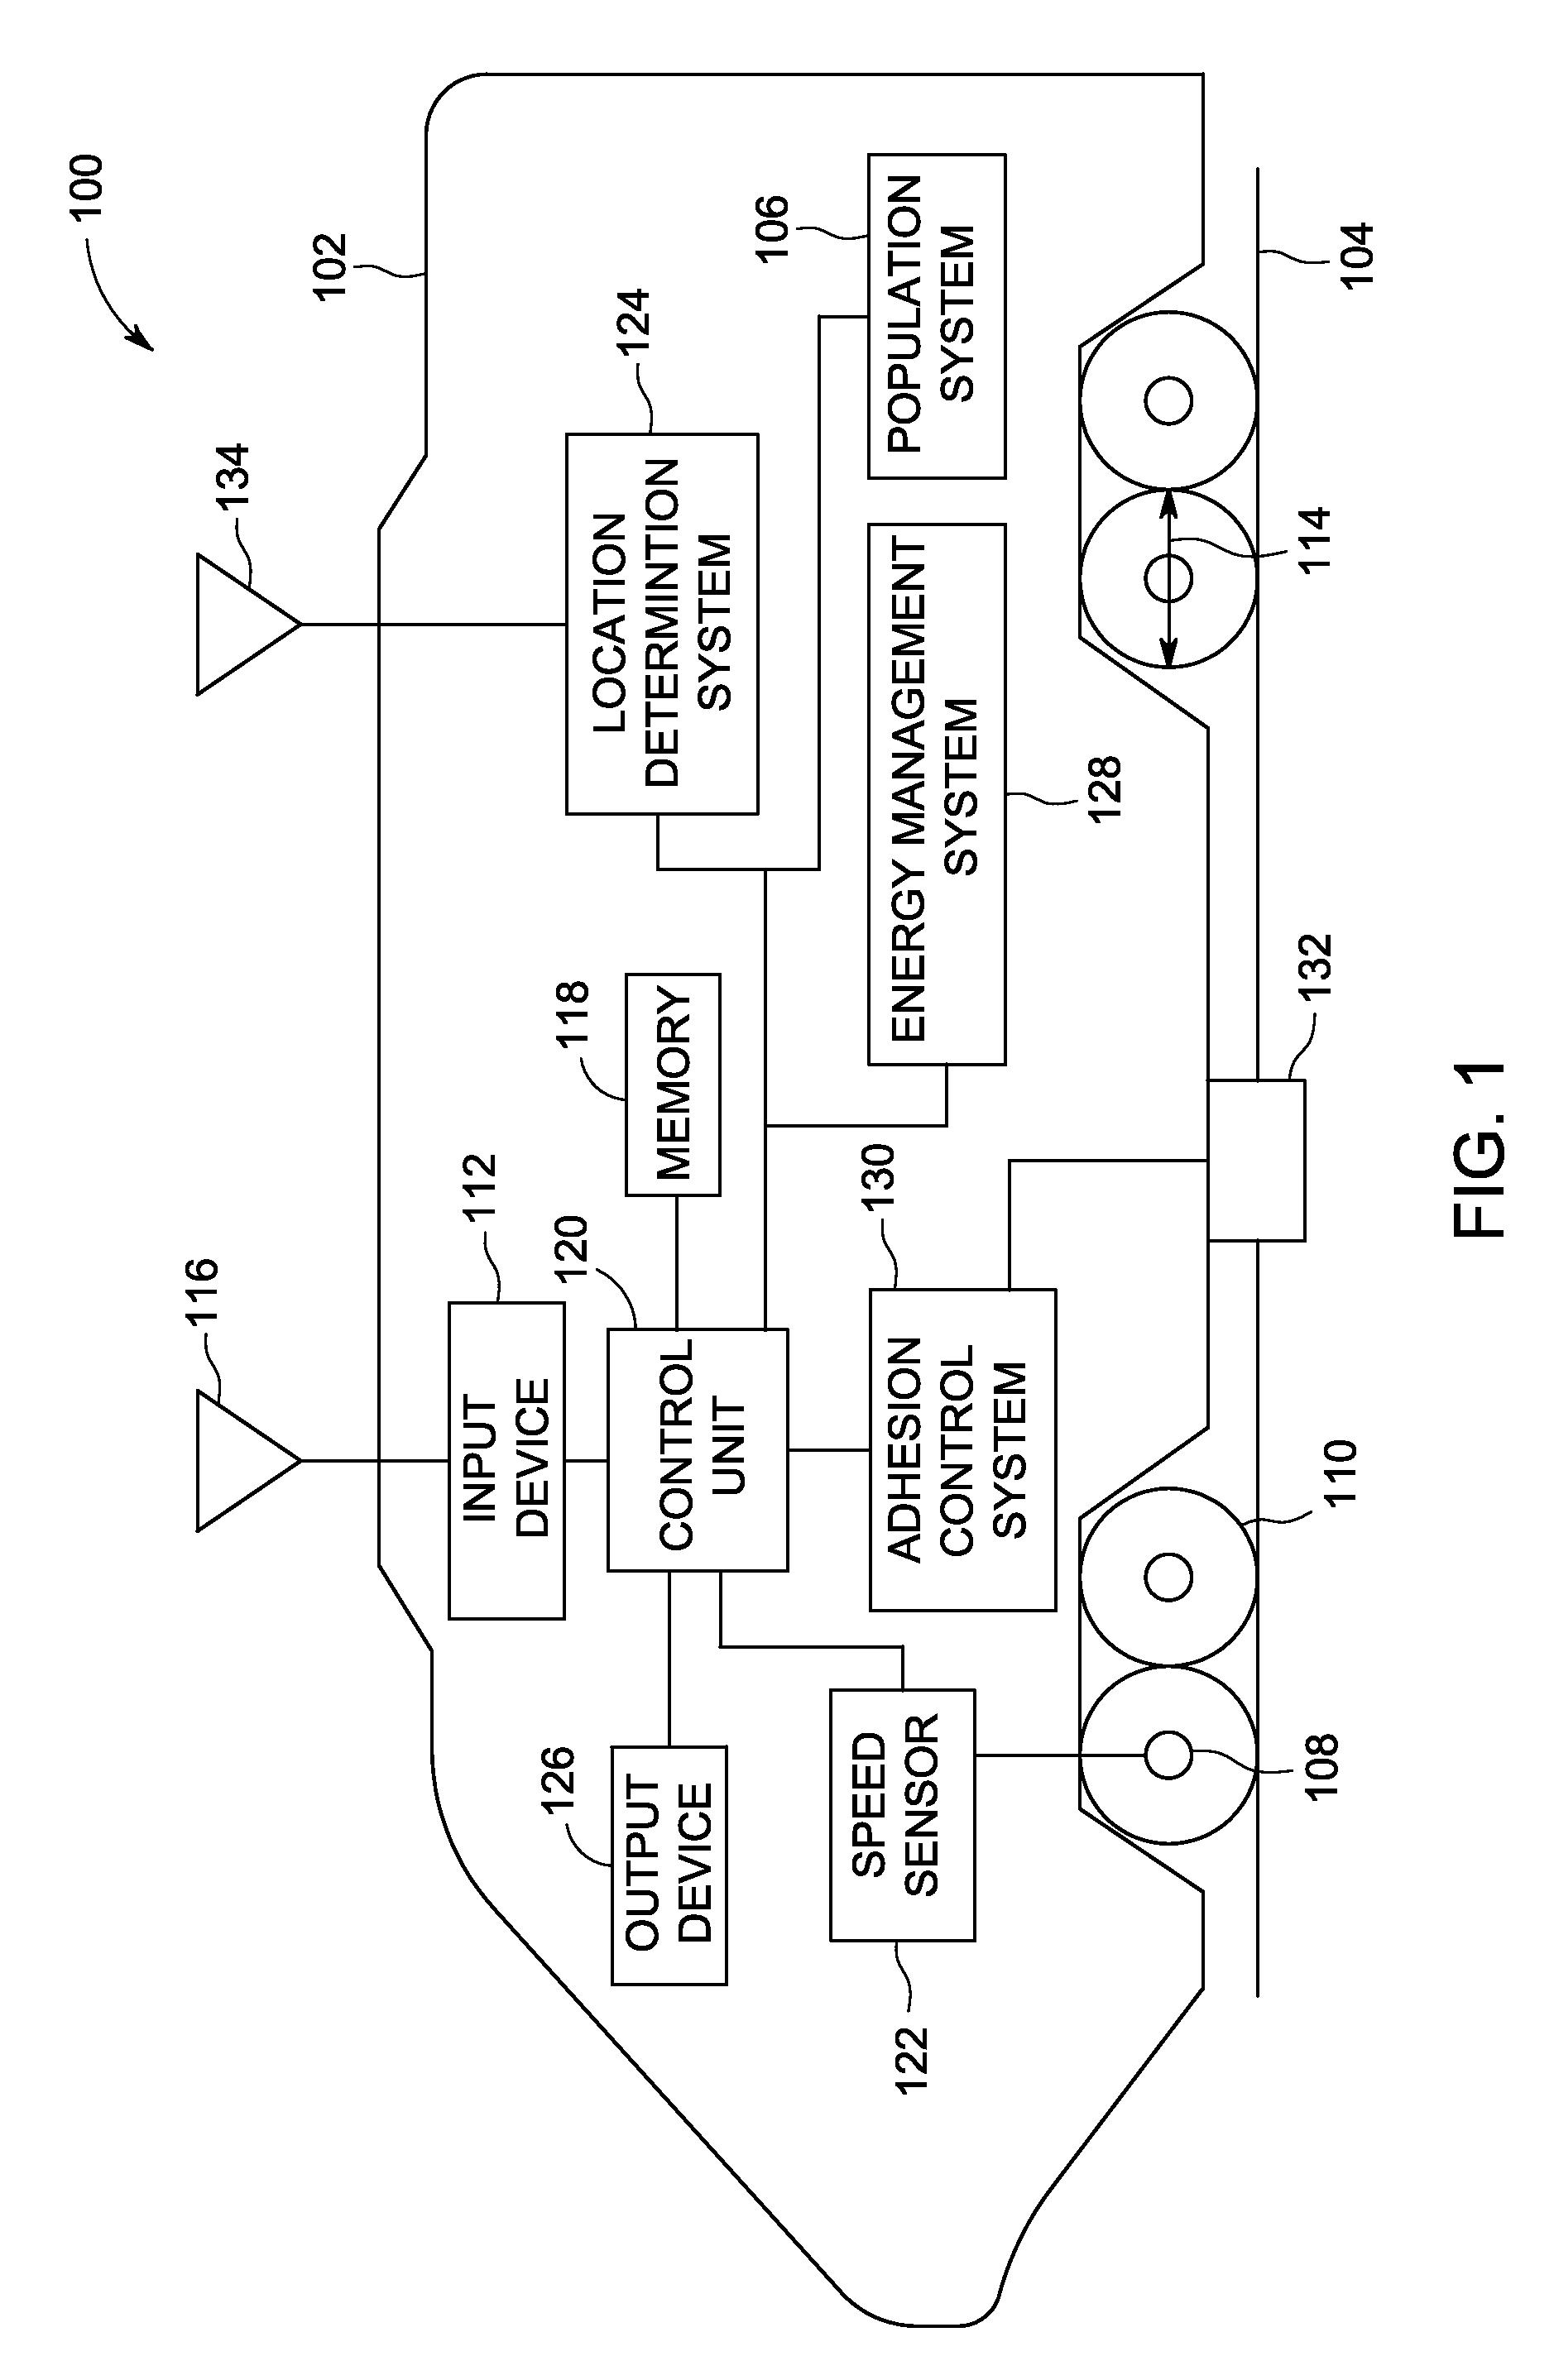 Method and system for identifying an erroneous speed of a vehicle